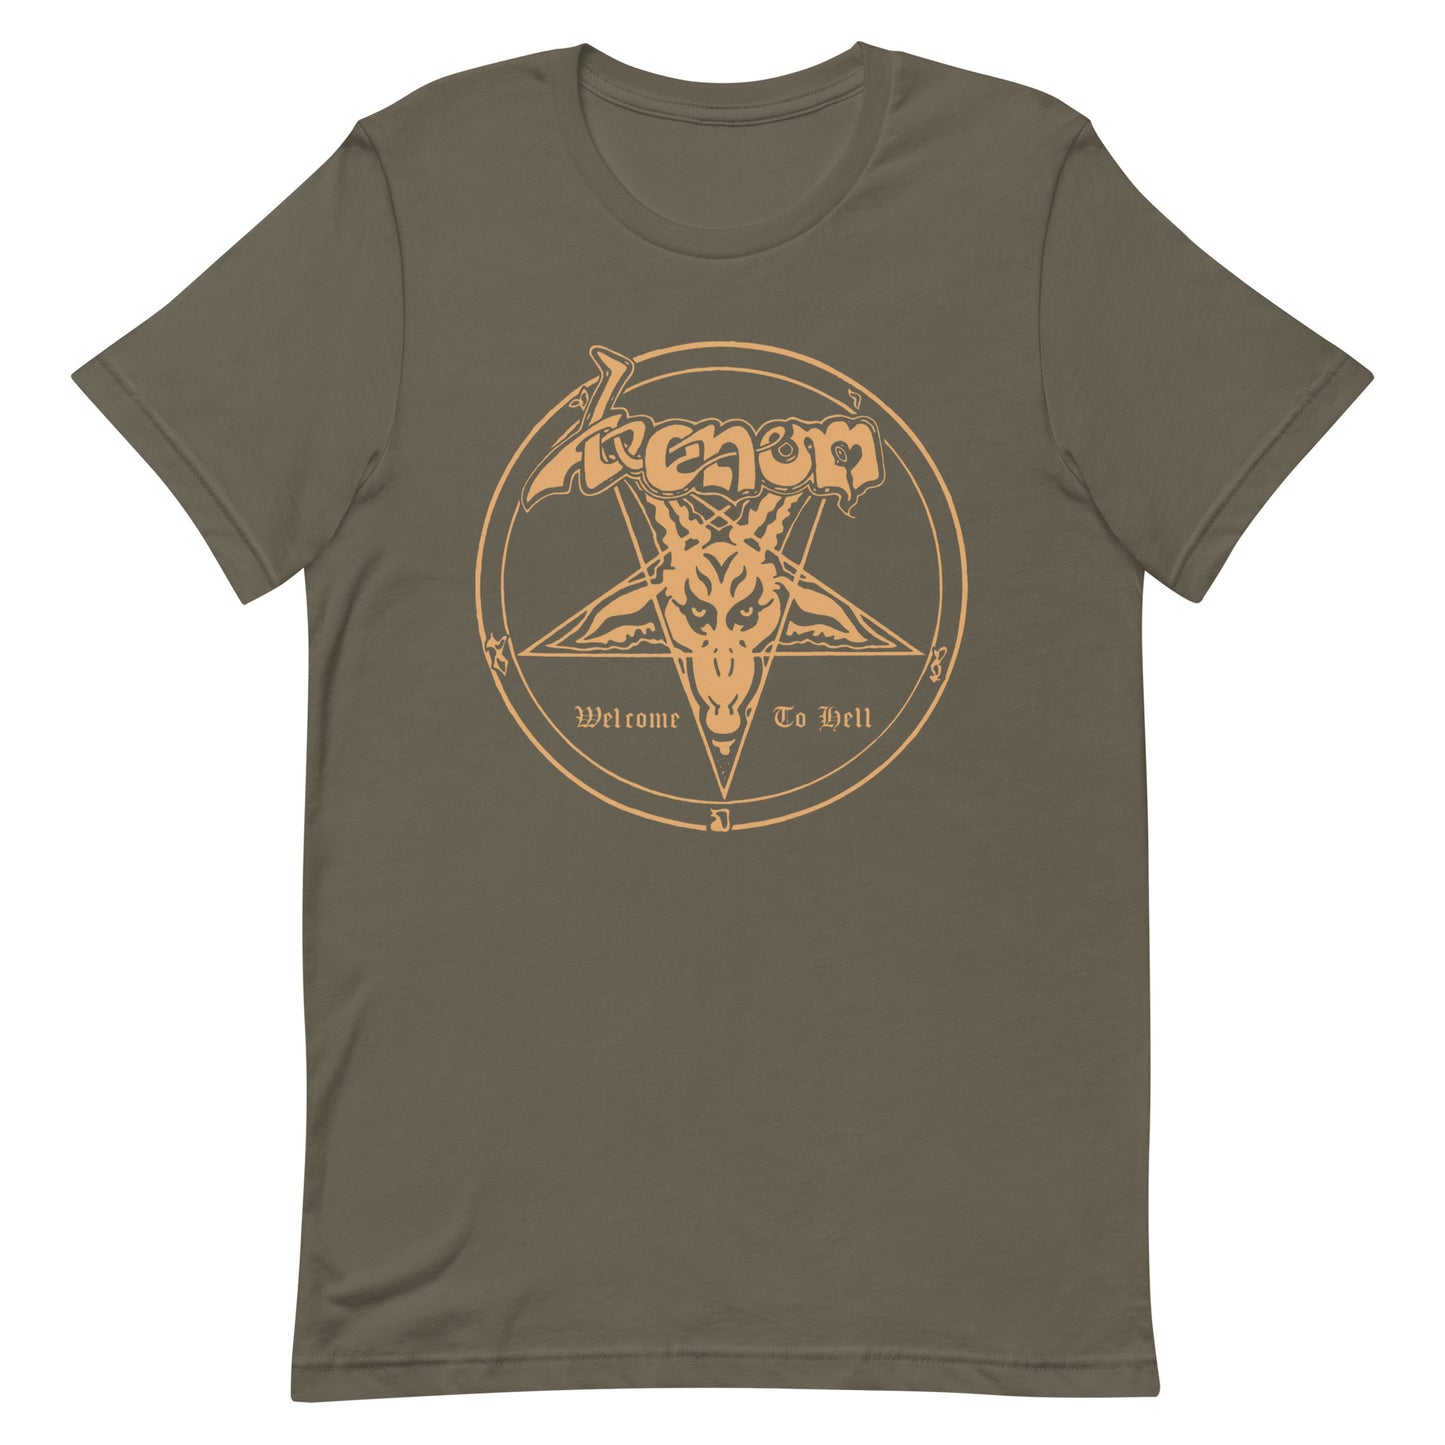 Venom - Welcome To Hell T-Shirt